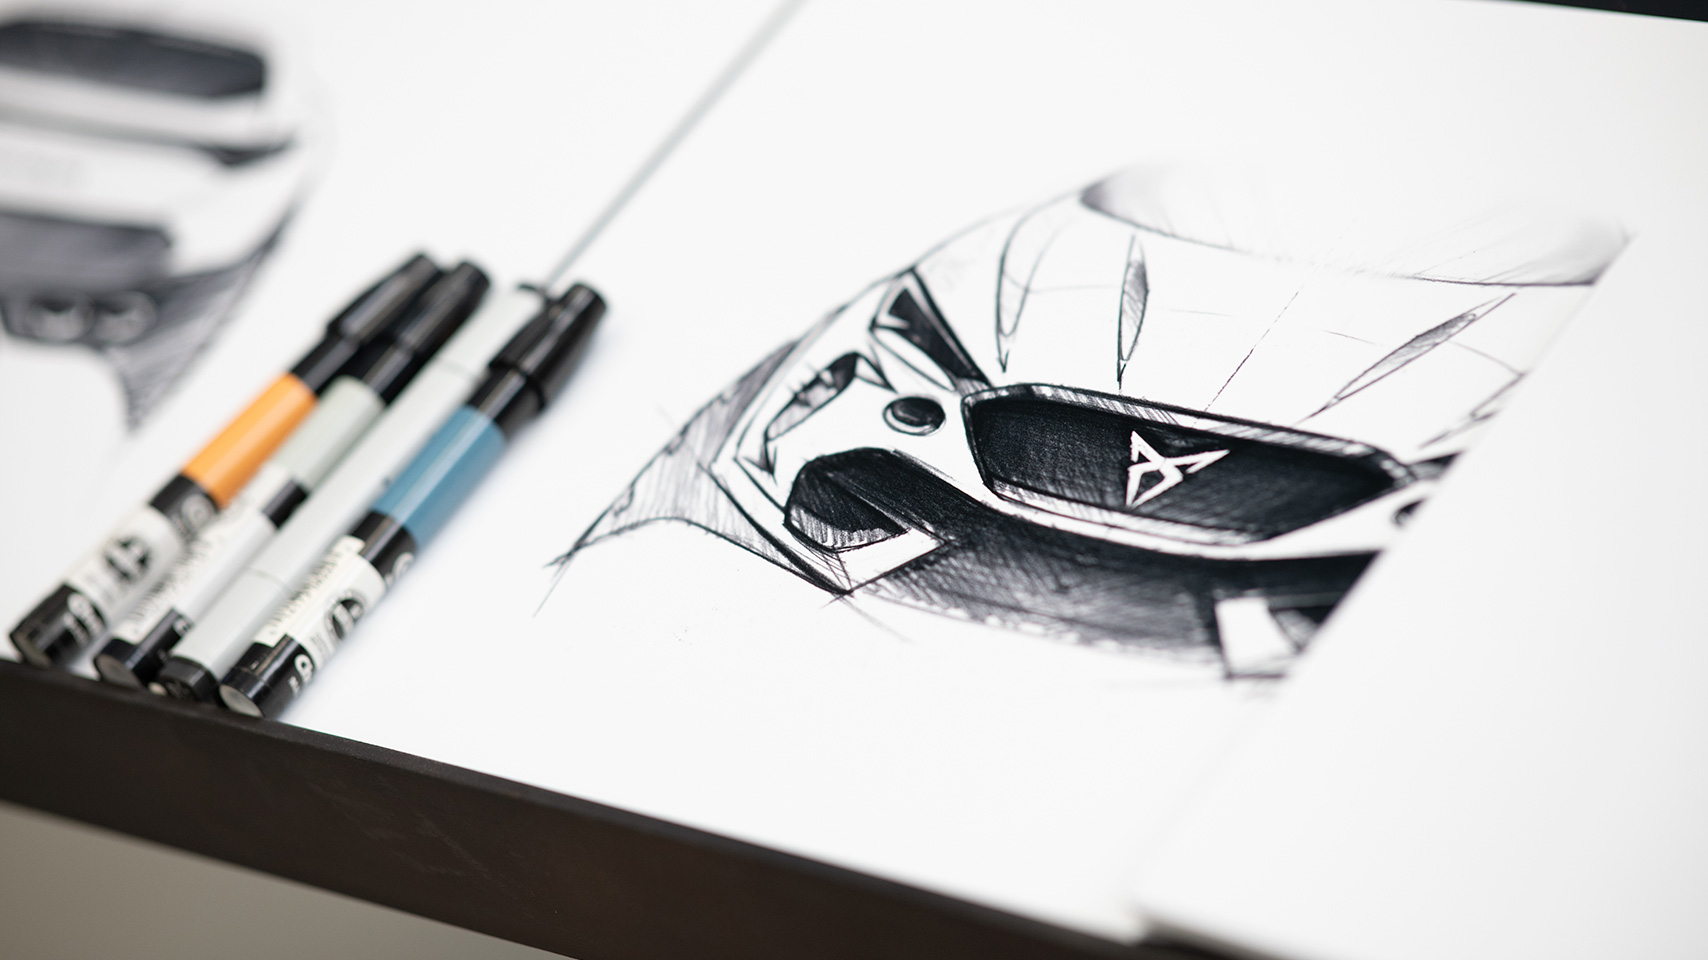 The first CUPRA in 3 design stages sketch